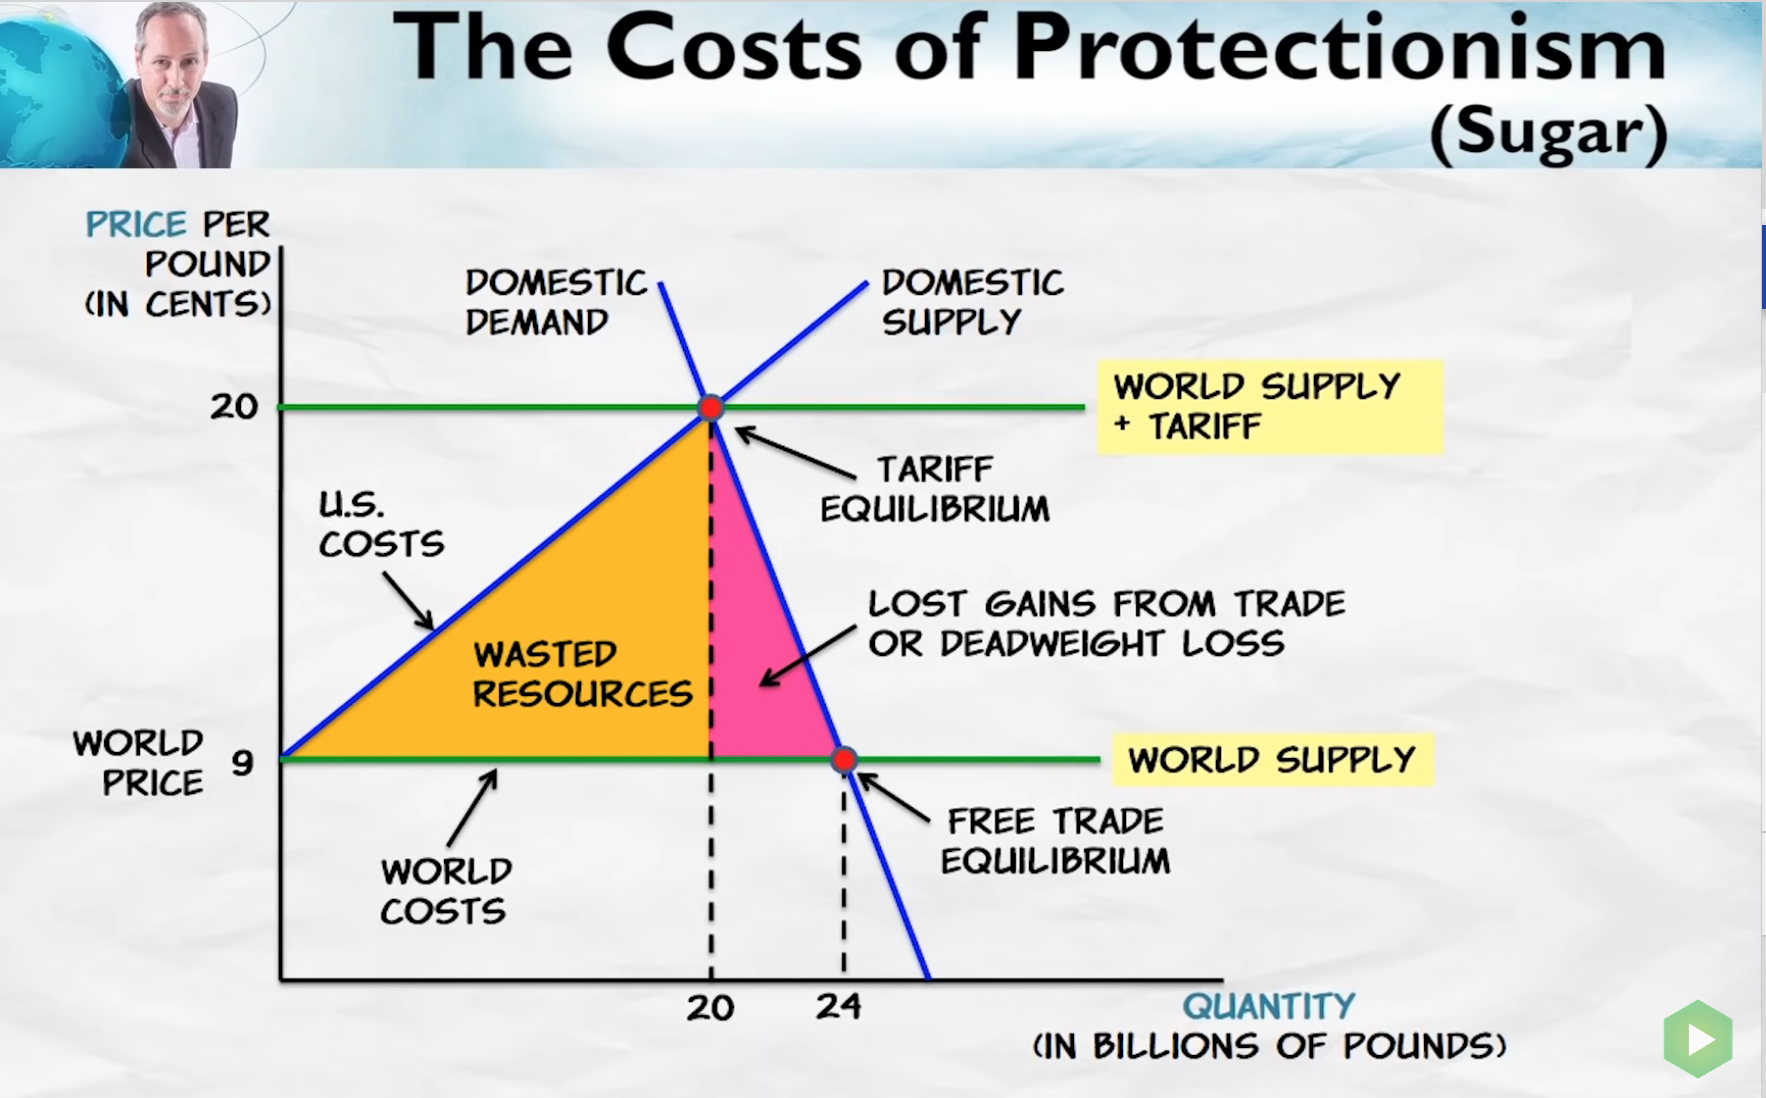 Cost of protectionism